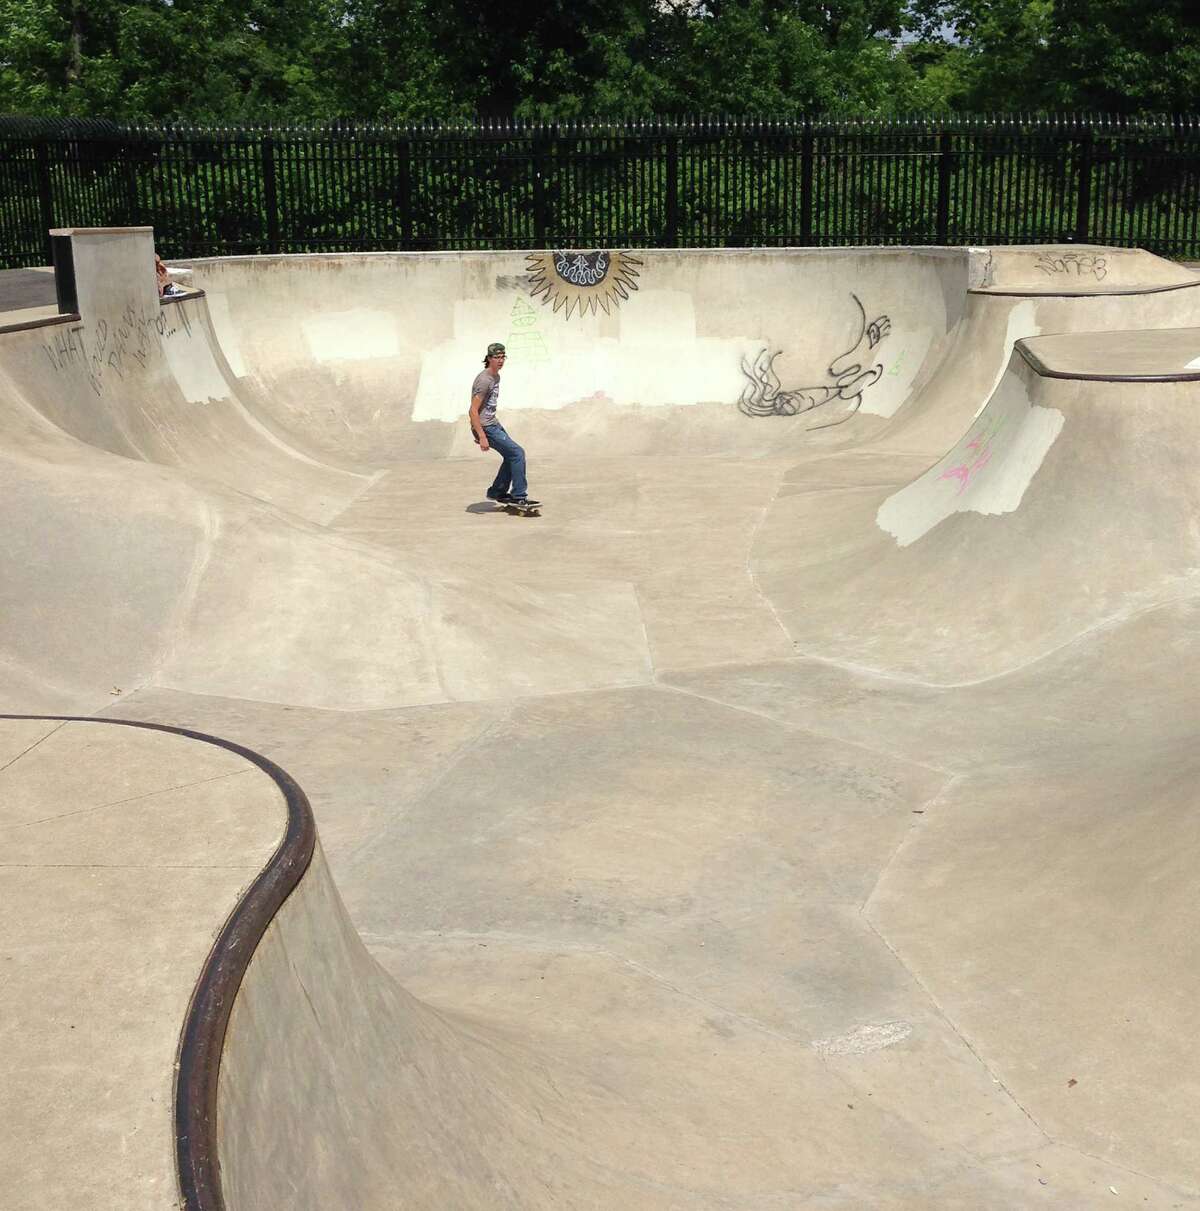 Riders worked the skate park at Scalzi Park in Stamford, Conn., on Tuesday, May 26, 2015. Though not on the water, Scalzi is heavily used because it offers so much: playgrounds, ballfields, a walking loop, volleyball, courts for bocce, tennis, basketball, handball, street hockey, baseball fields, a spray pool and a skateboarding park, along with lots of big trees for picnicking in the shade.